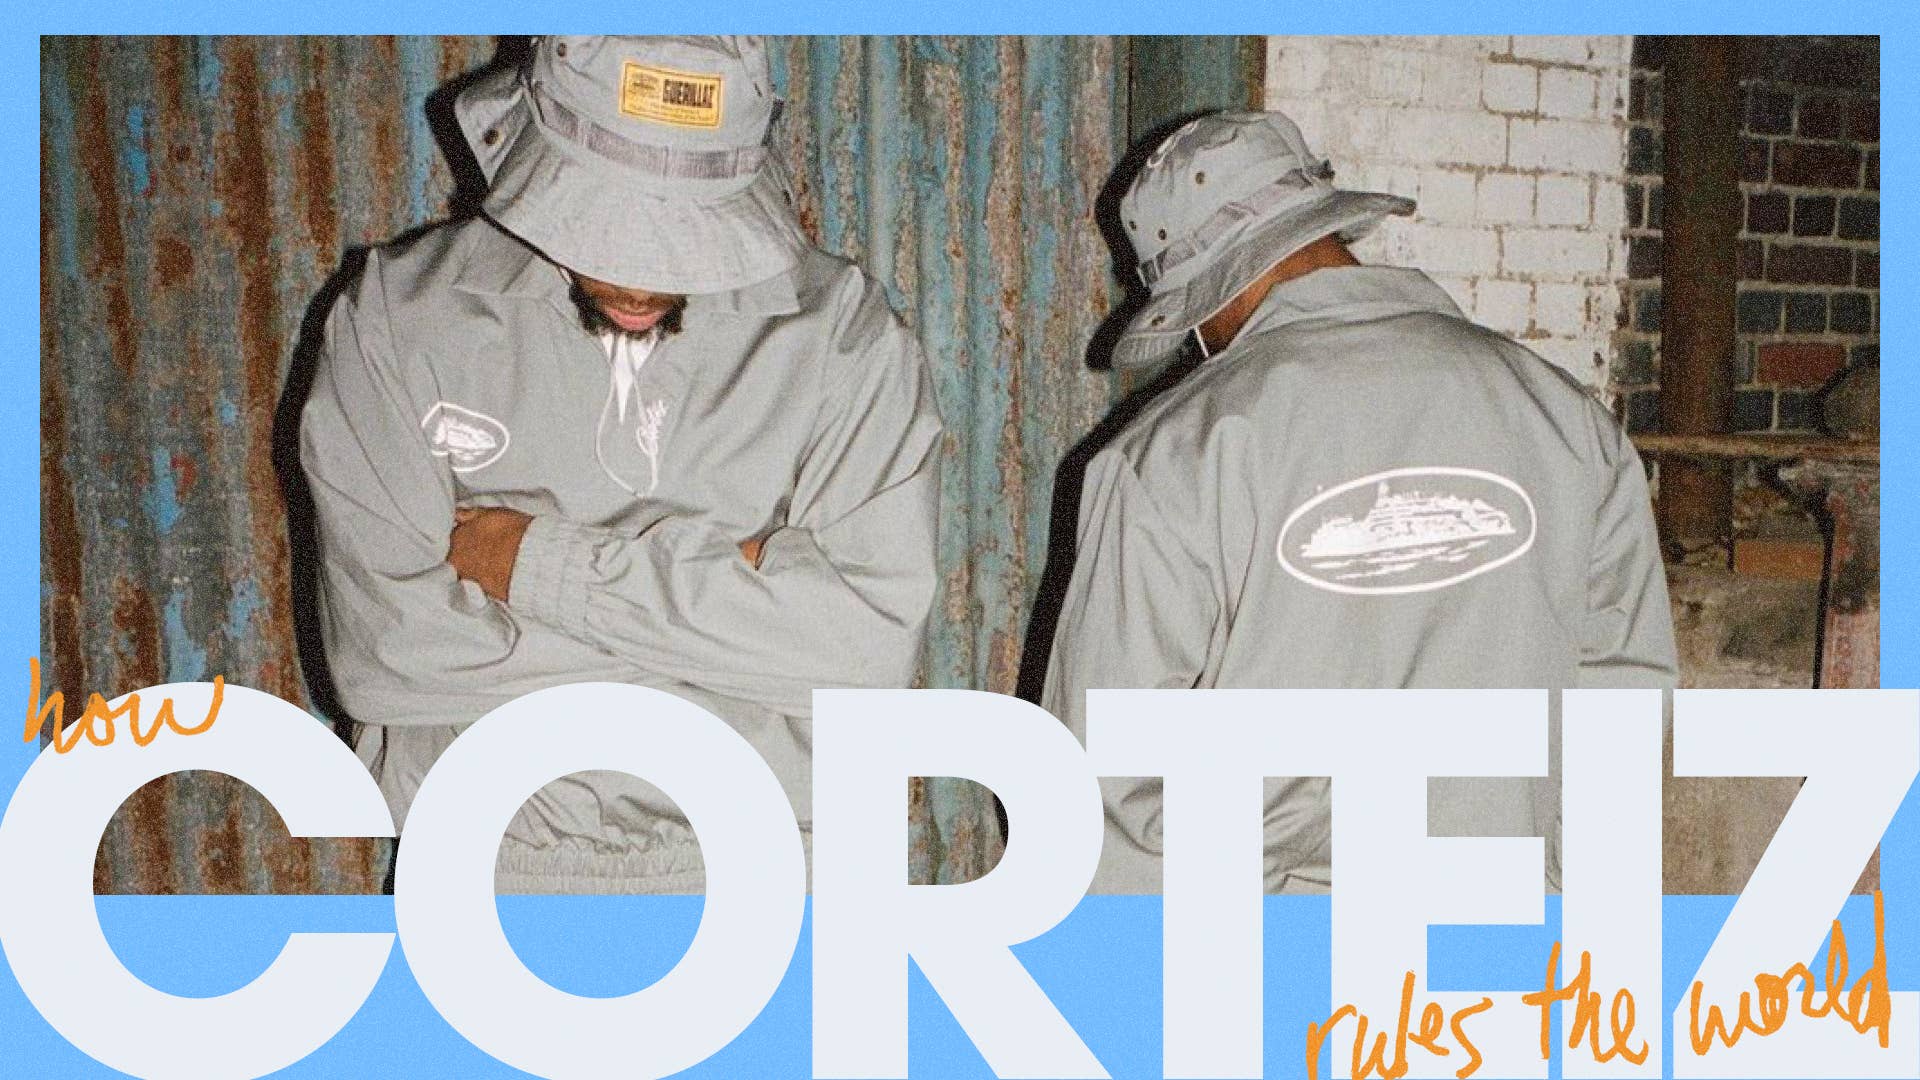 Everything About Corteiz: The UK Streetwear Brand Co-Signed by Nike, Drake,  Central Cee, and More